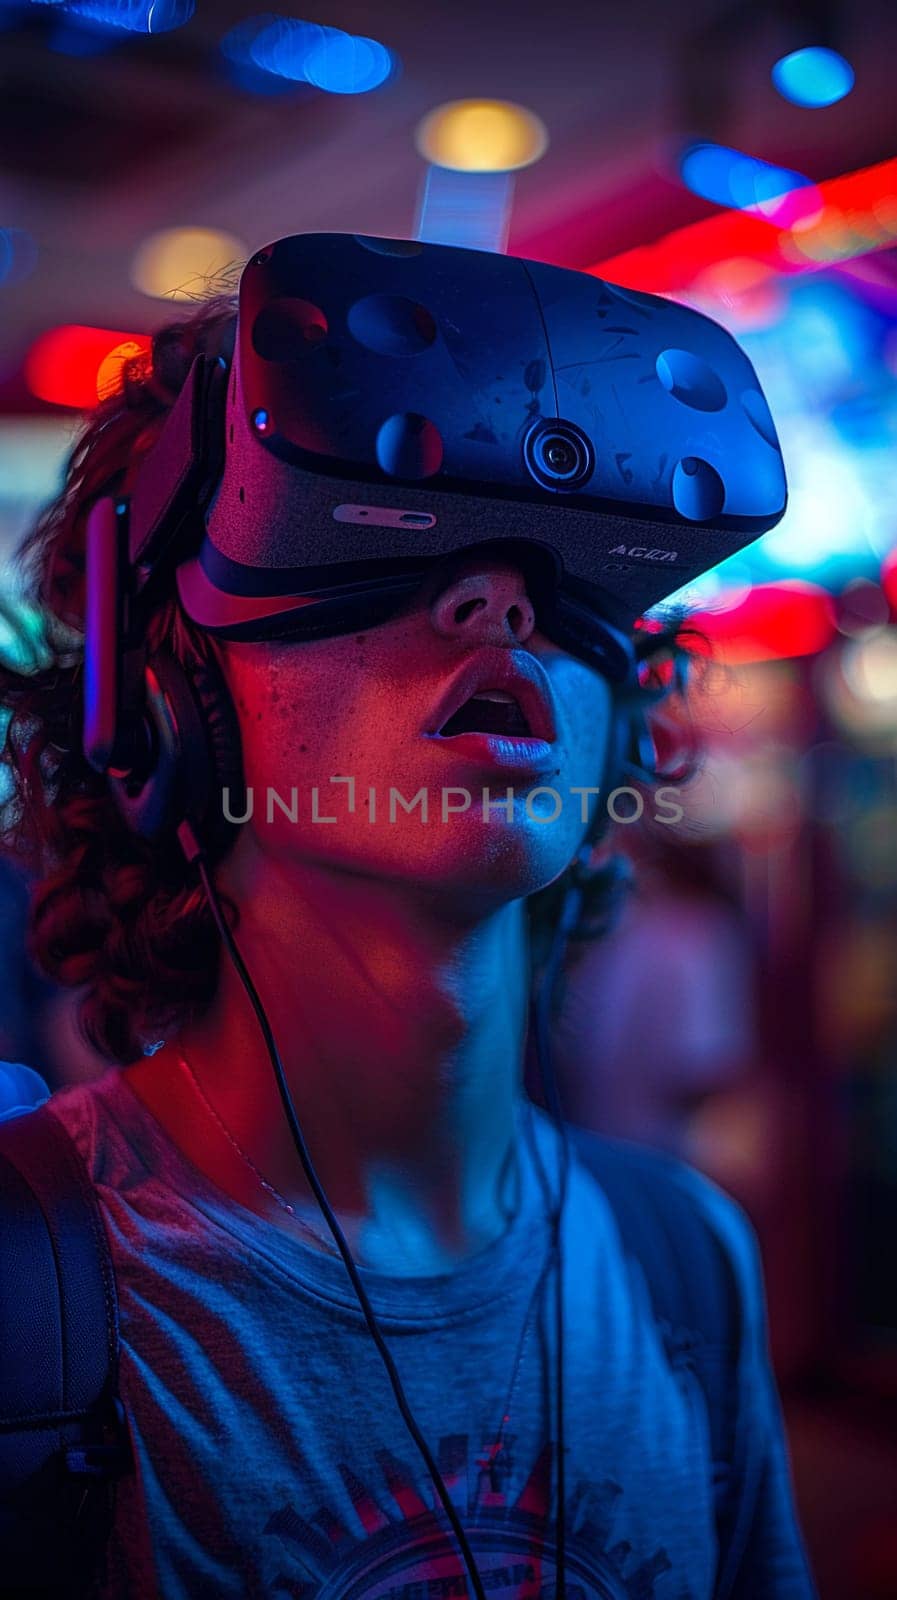 Virtual Reality Arcade Blurs Realities in Business of Immersive Gaming, VR stations and excited players blur a story of digital escapism and fun in the virtual reality arcade business.